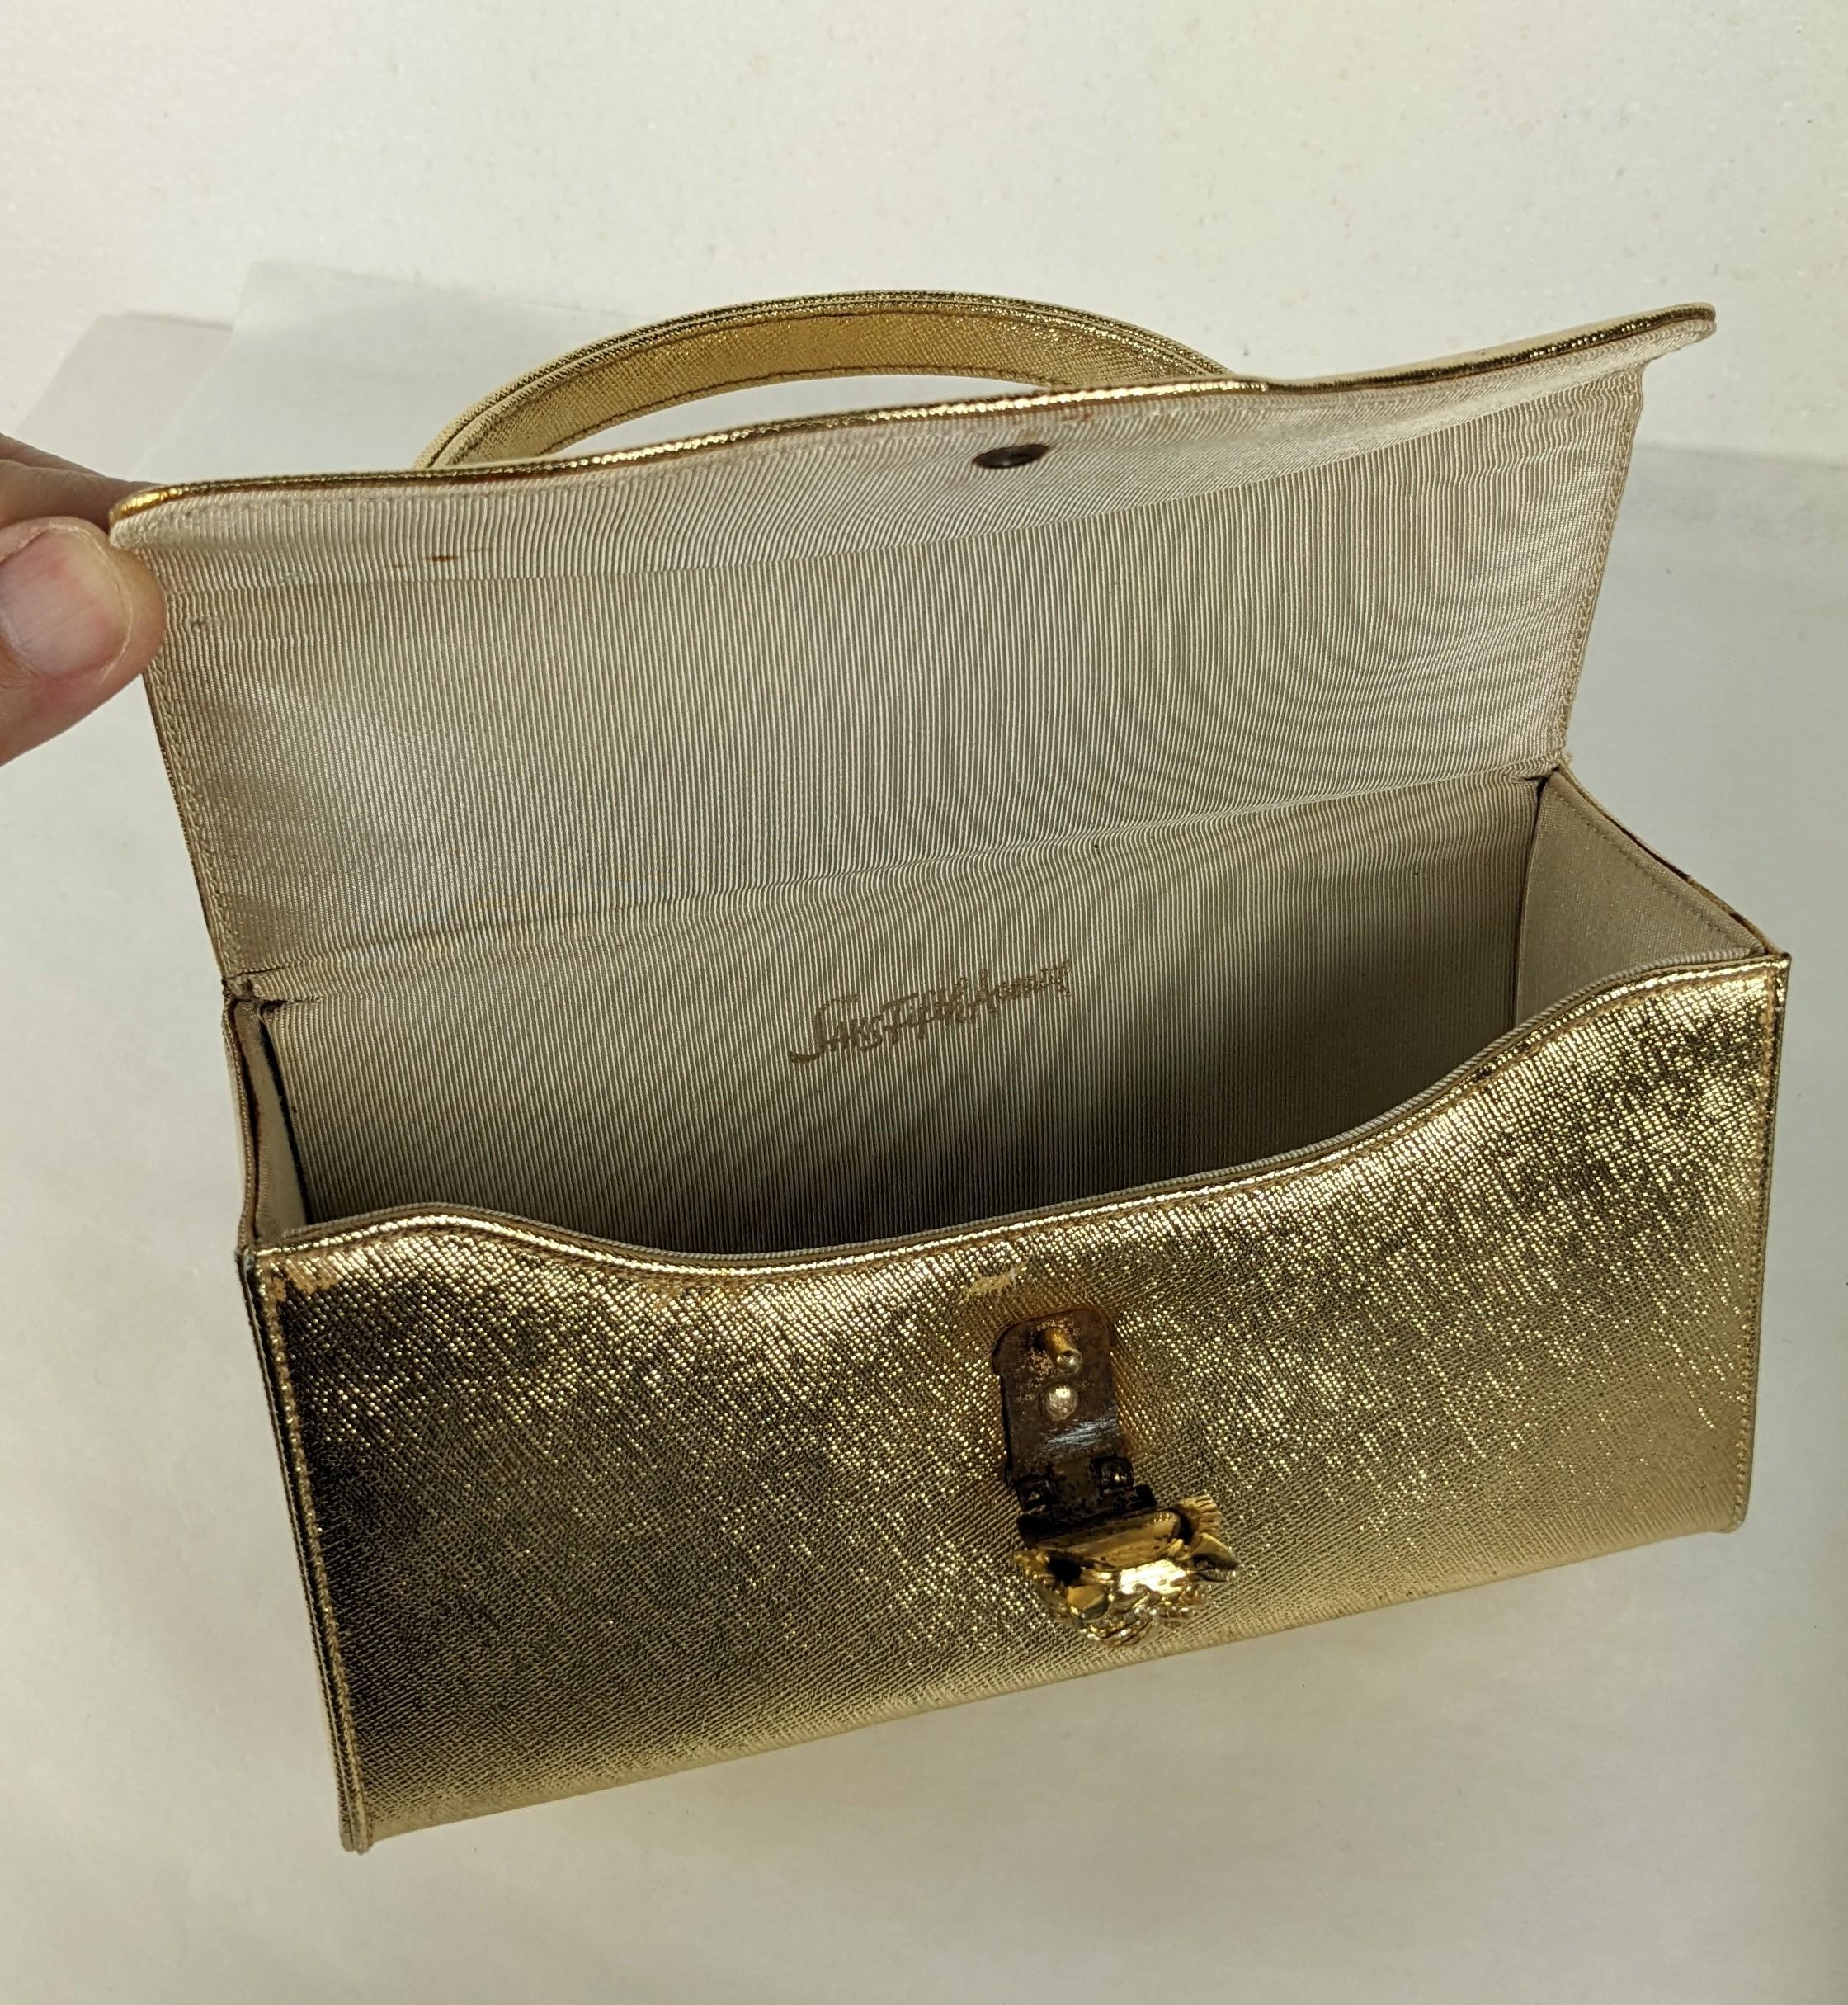 Pave Tiger Head Gold Leatherette Box Bag In Good Condition For Sale In New York, NY